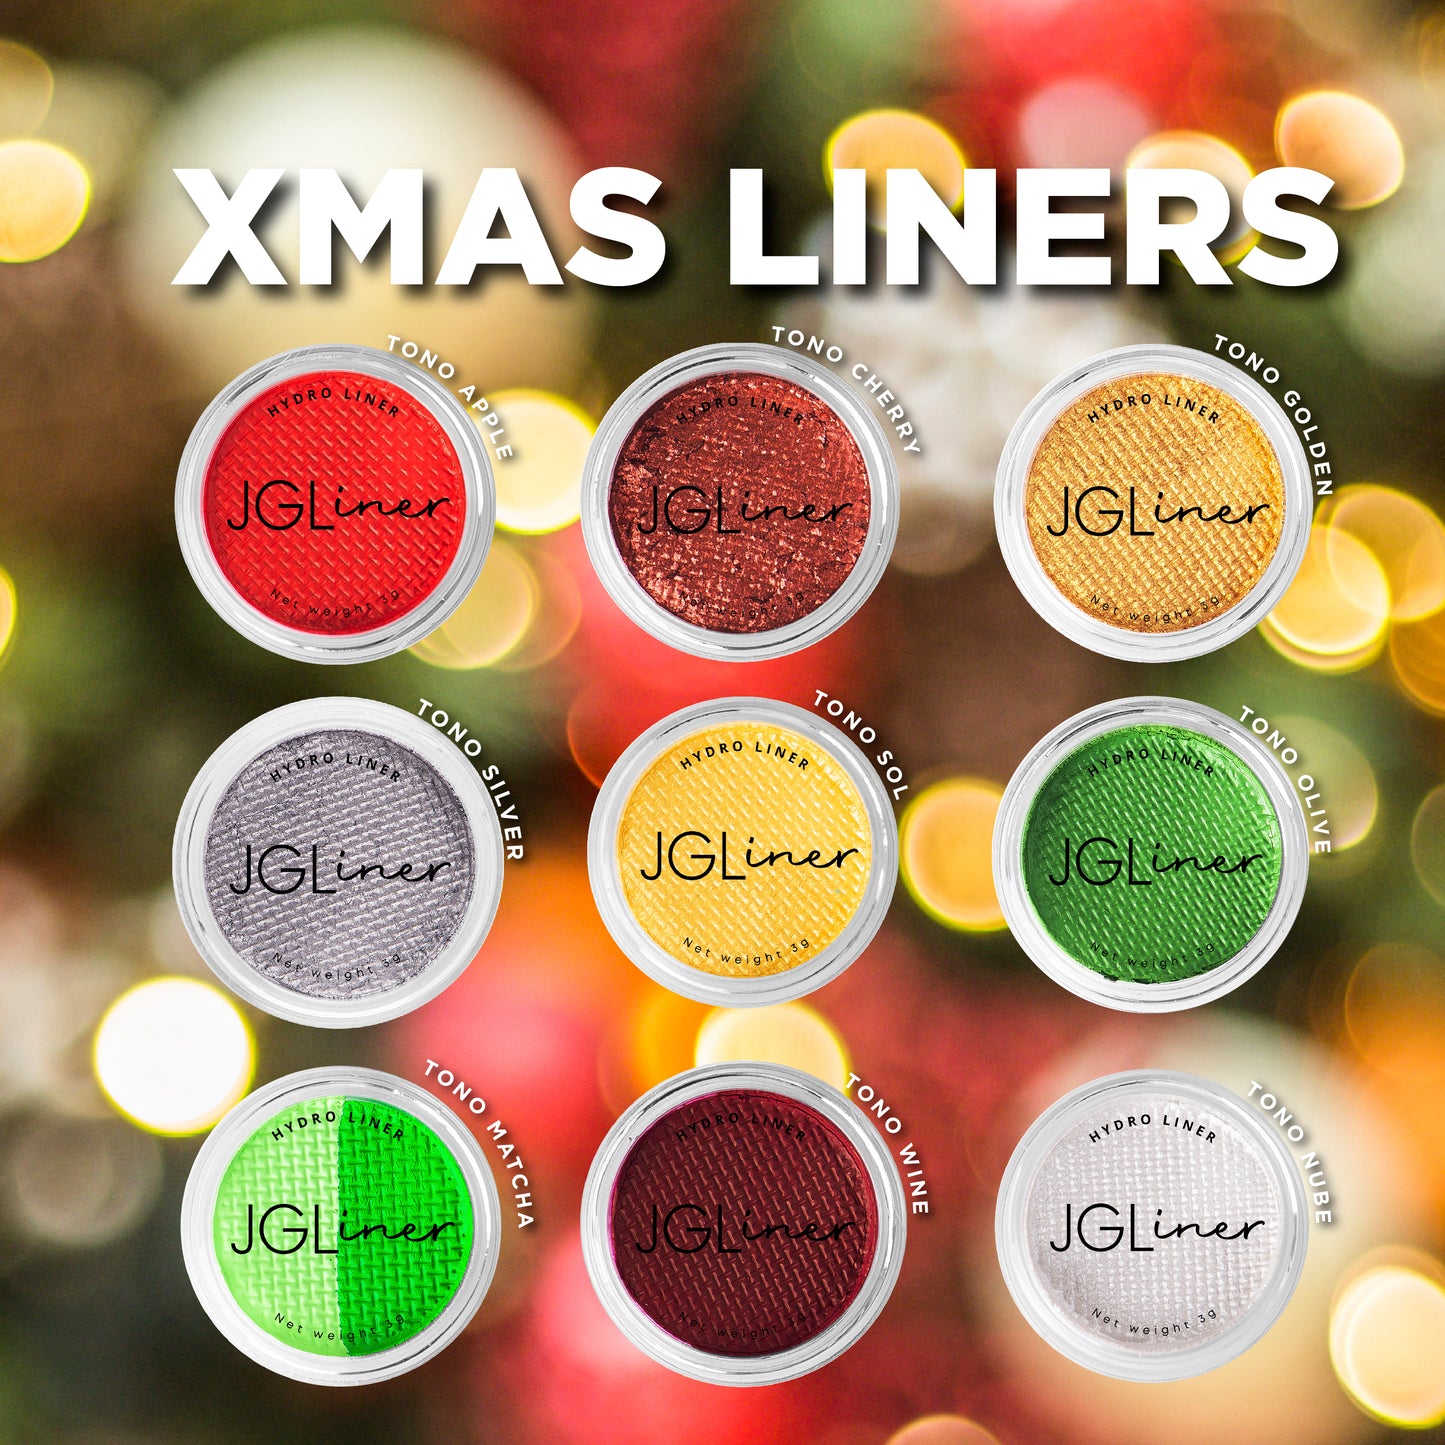 Xmas Liners